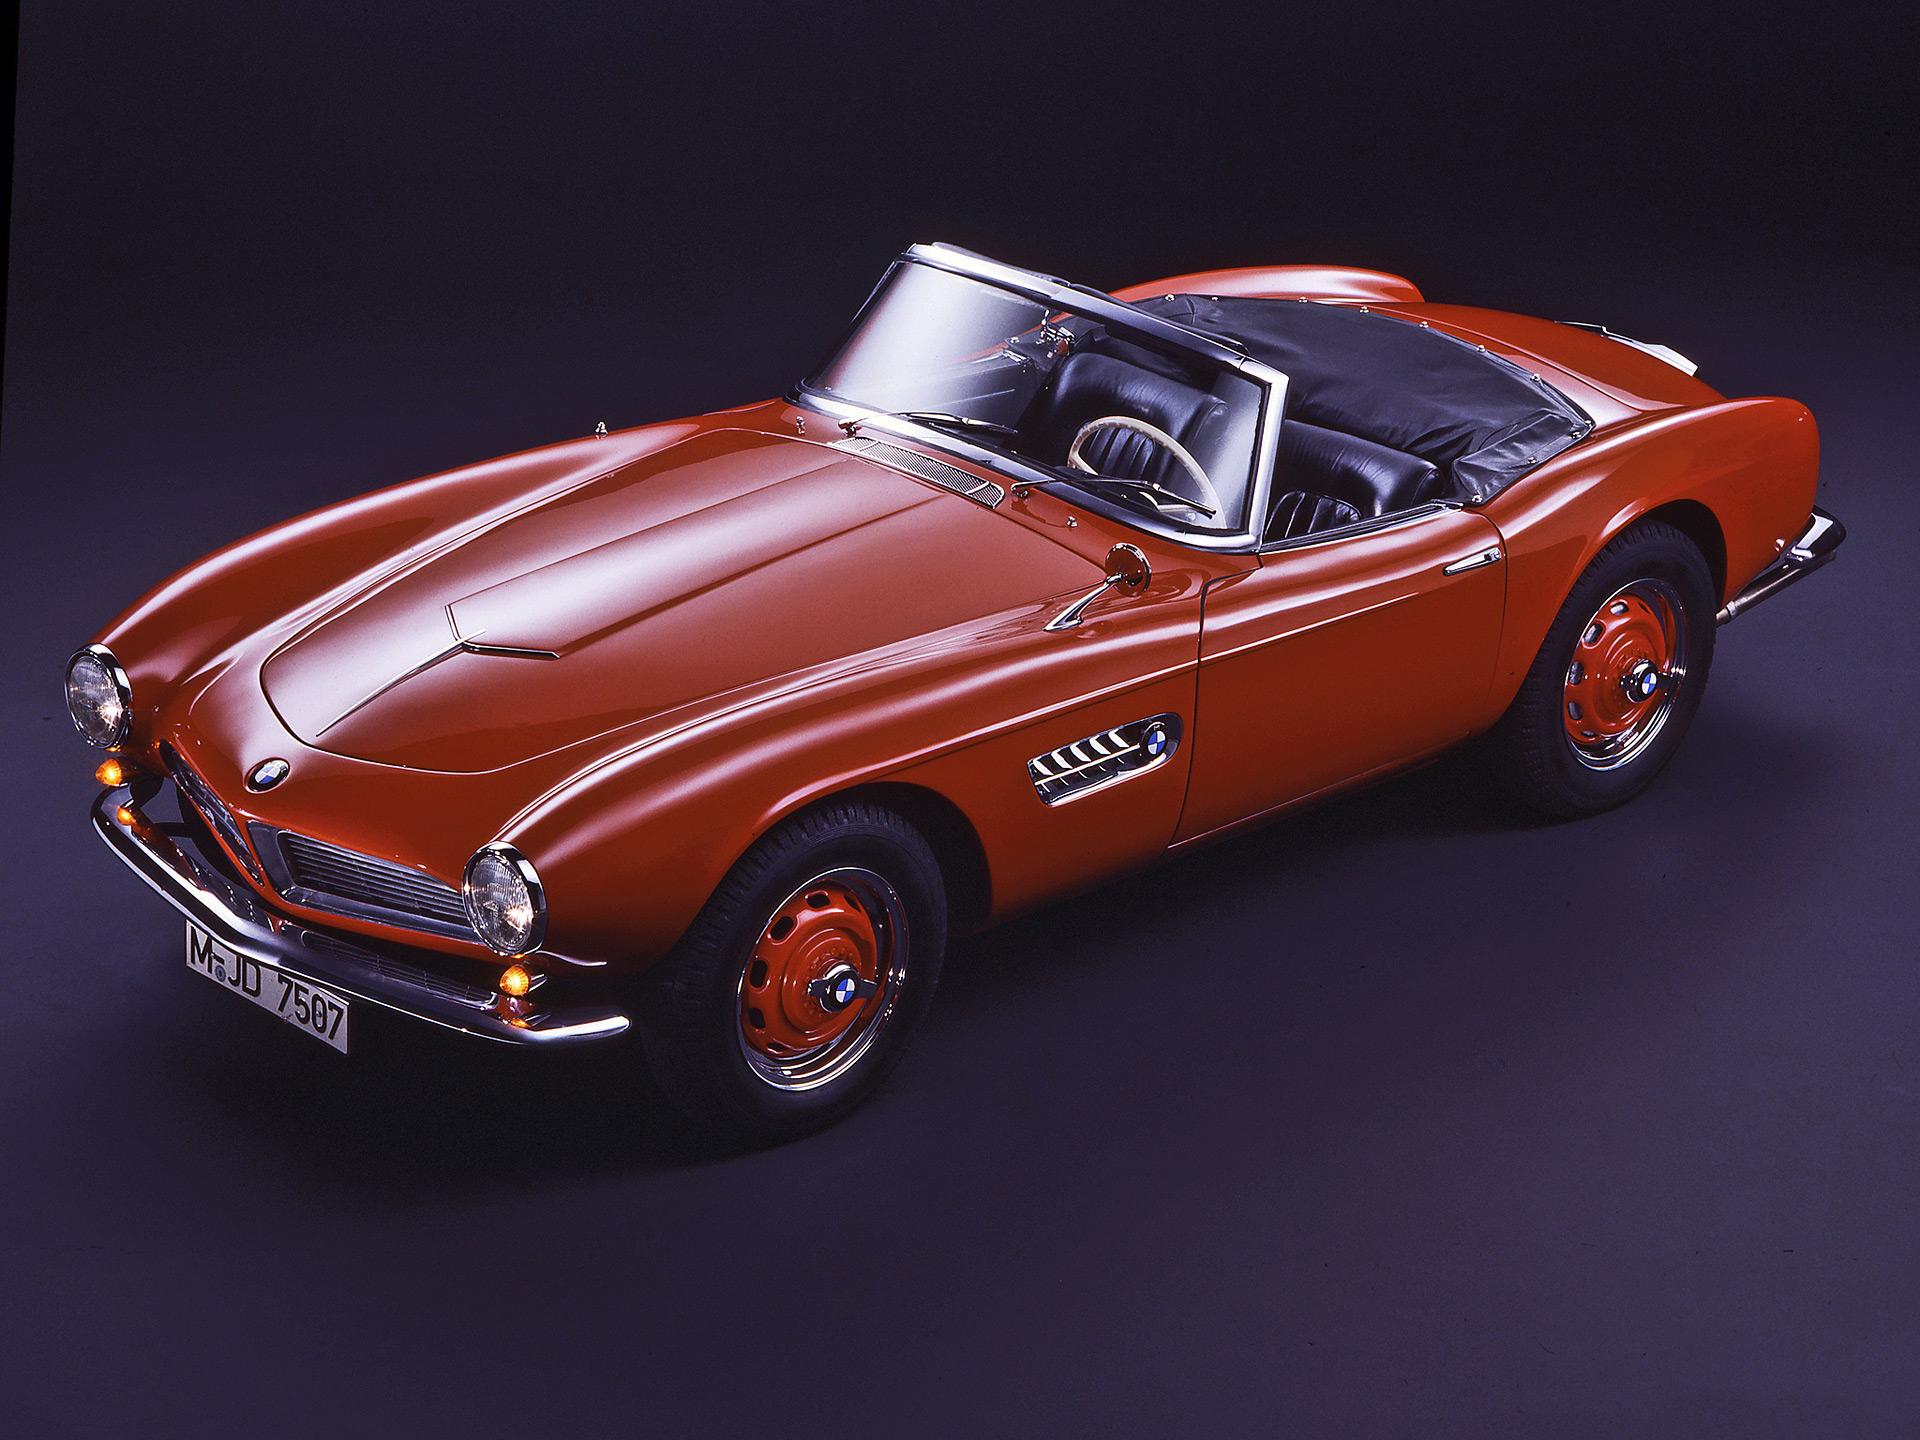 Vehicles BMW 507 HD Wallpaper | Background Image